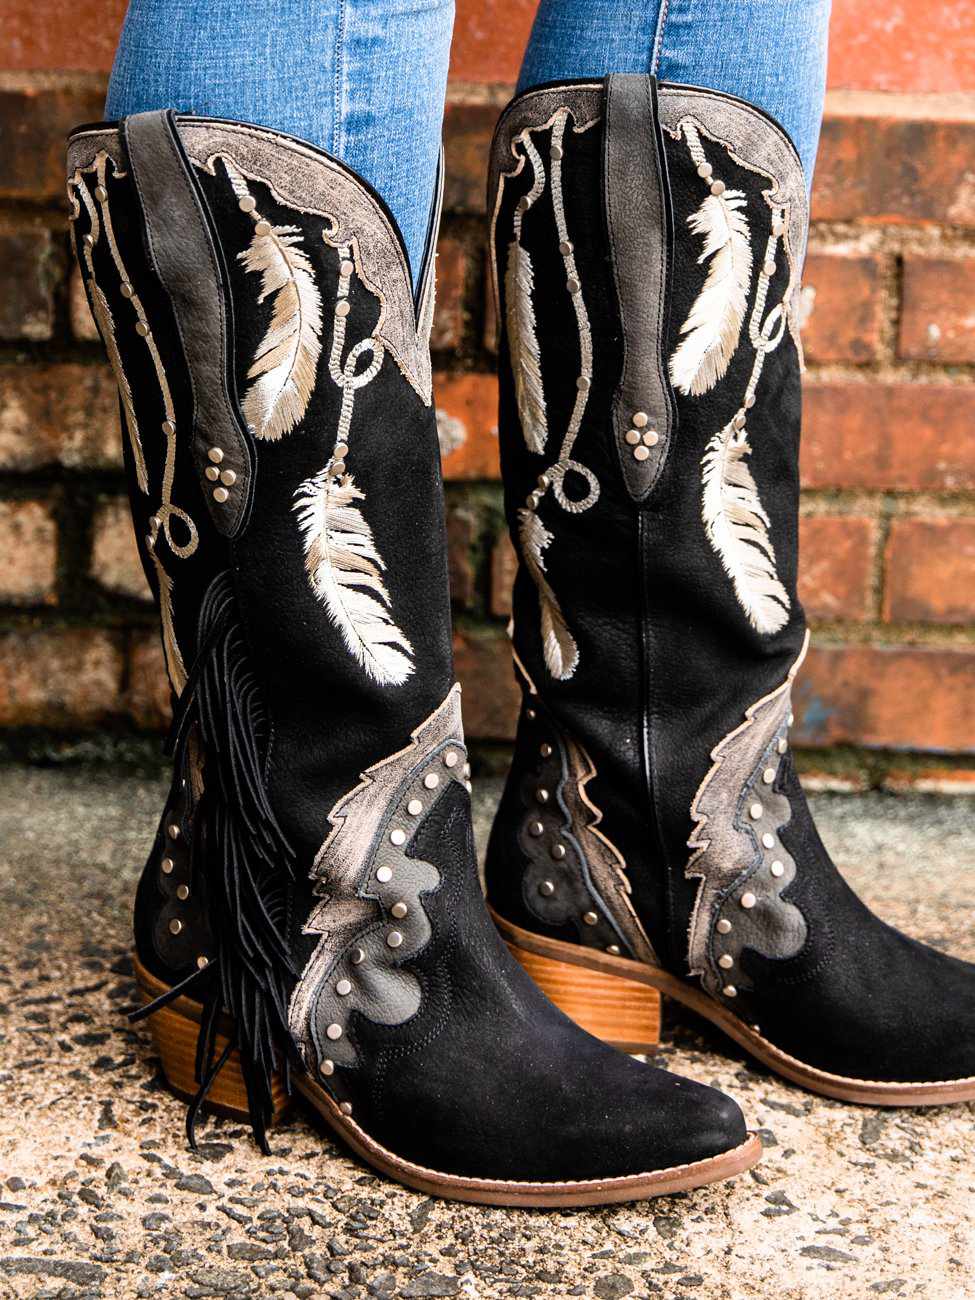 Dream Catcher Boots - Black-Boots-Southern Fried Chics